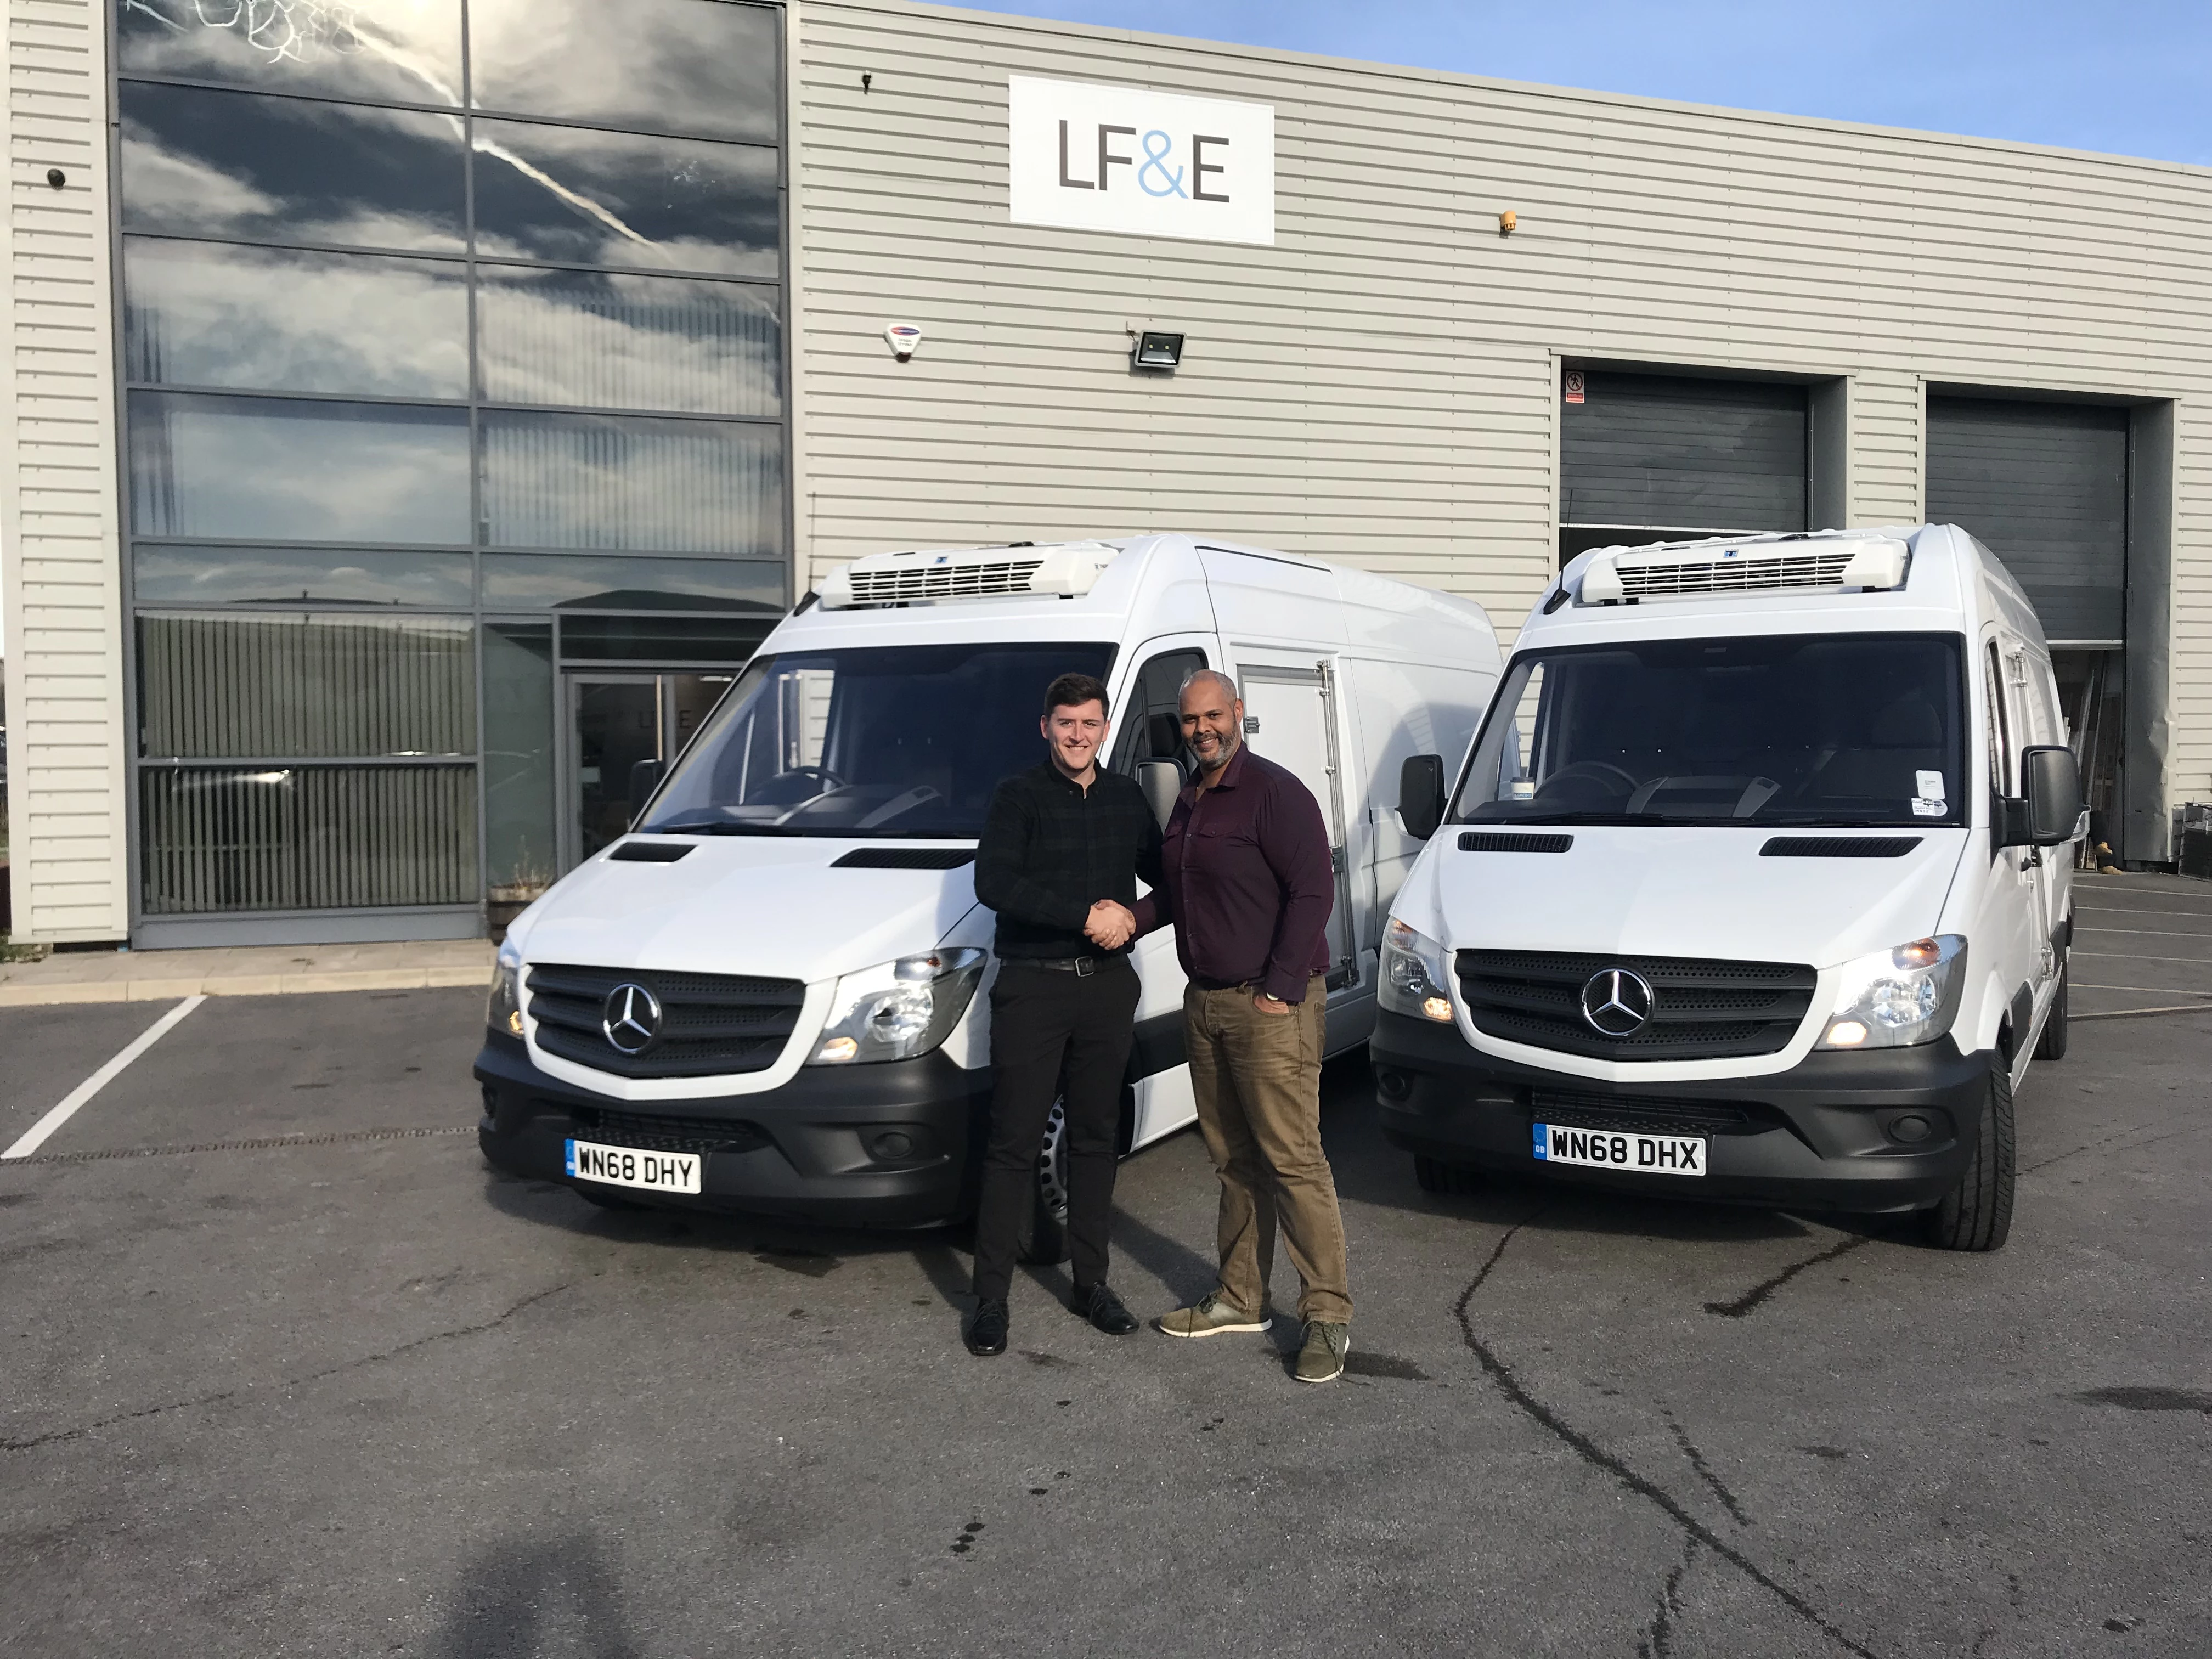 LF&E take delivery of their new vans